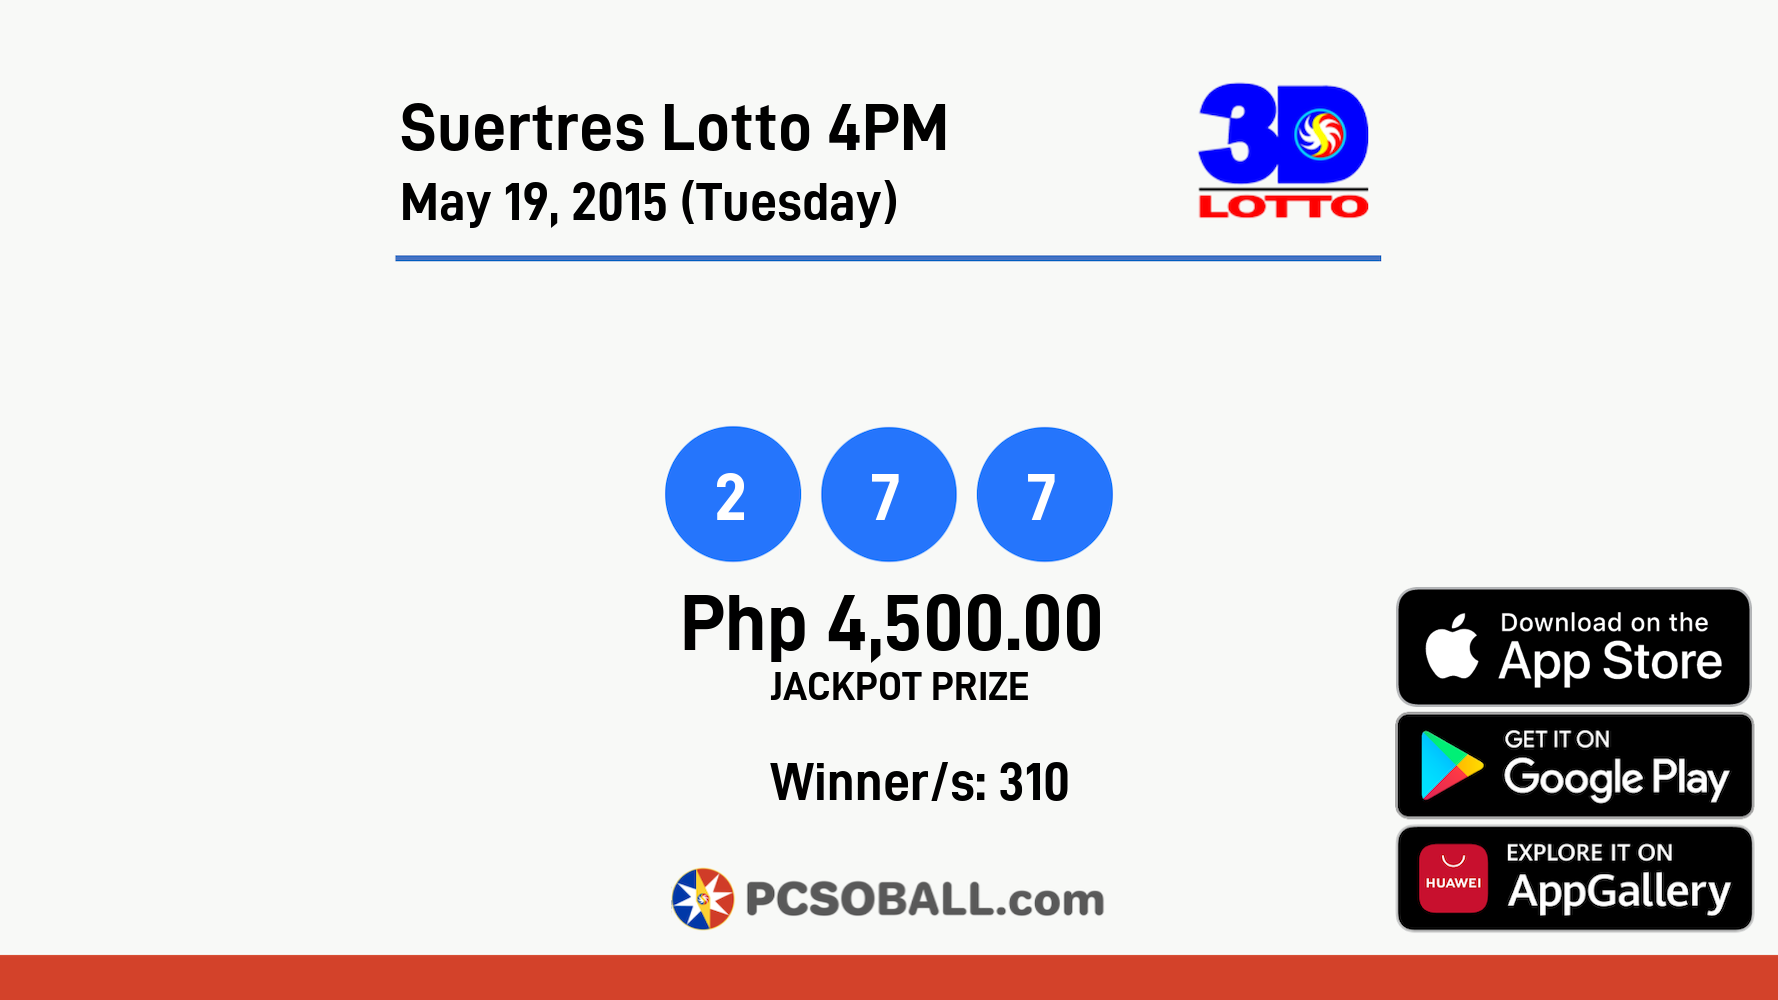 Suertres Lotto 4PM May 19, 2015 (Tuesday) Result